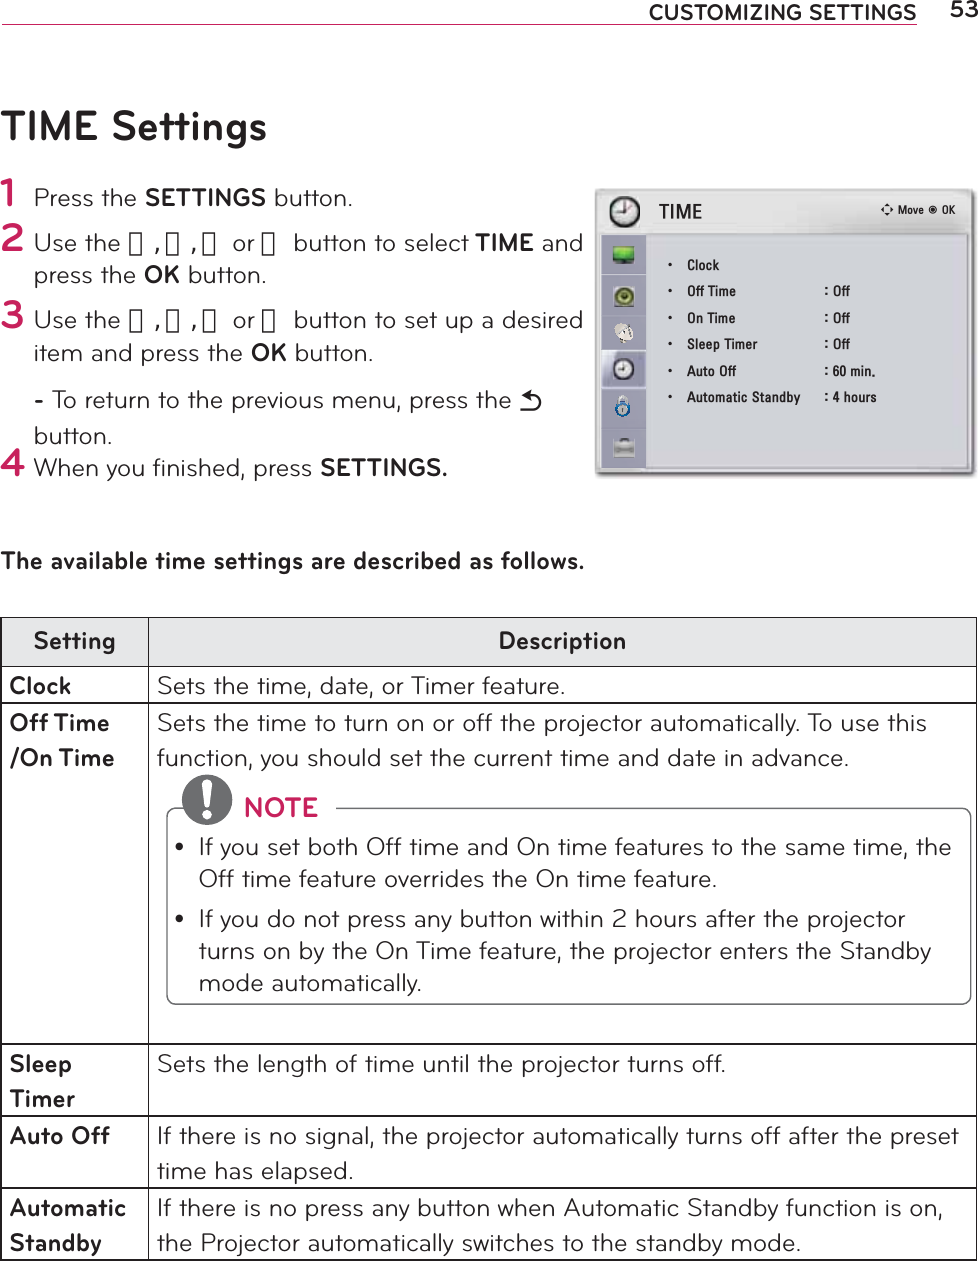 53CUSTOMIZING SETTINGSTIME Settings1 Press the SETTINGS button.2 Use the 󱛨, 󱛩, 󱛦 or 󱛧 button to select TIME and press the OK button.3 Use the 󱛨, 󱛩, 󱛦 or 󱛧 button to set up a desired item and press the OK button.- To return to the previous menu, press the ᰳ button.4 When you ﬁnished, press SETTINGS.The available time settings are described as follows.Setting DescriptionClock Sets the time, date, or Timer feature.Off Time/On TimeSets the time to turn on or off the projector automatically. To use this function, you should set the current time and date in advance. NOTEy If you set both Off time and On time features to the same time, the Off time feature overrides the On time feature.y If you do not press any button within 2 hours after the projector turns on by the On Time feature, the projector enters the Standby mode automatically.Sleep TimerSets the length of time until the projector turns off. Auto Off If there is no signal, the projector automatically turns off after the preset time has elapsed.Automatic StandbyIf there is no press any button when Automatic Standby function is on, the Projector automatically switches to the standby mode.ᯒ0RYHᯙ2.7,0(ؒ &amp;ORFNؒ 2II7LPH 2IIؒ 2Q7LPH 2IIؒ 6OHHS7LPHU 2IIؒ $XWR2II PLQؒ $XWRPDWLF6WDQGE\ KRXUV